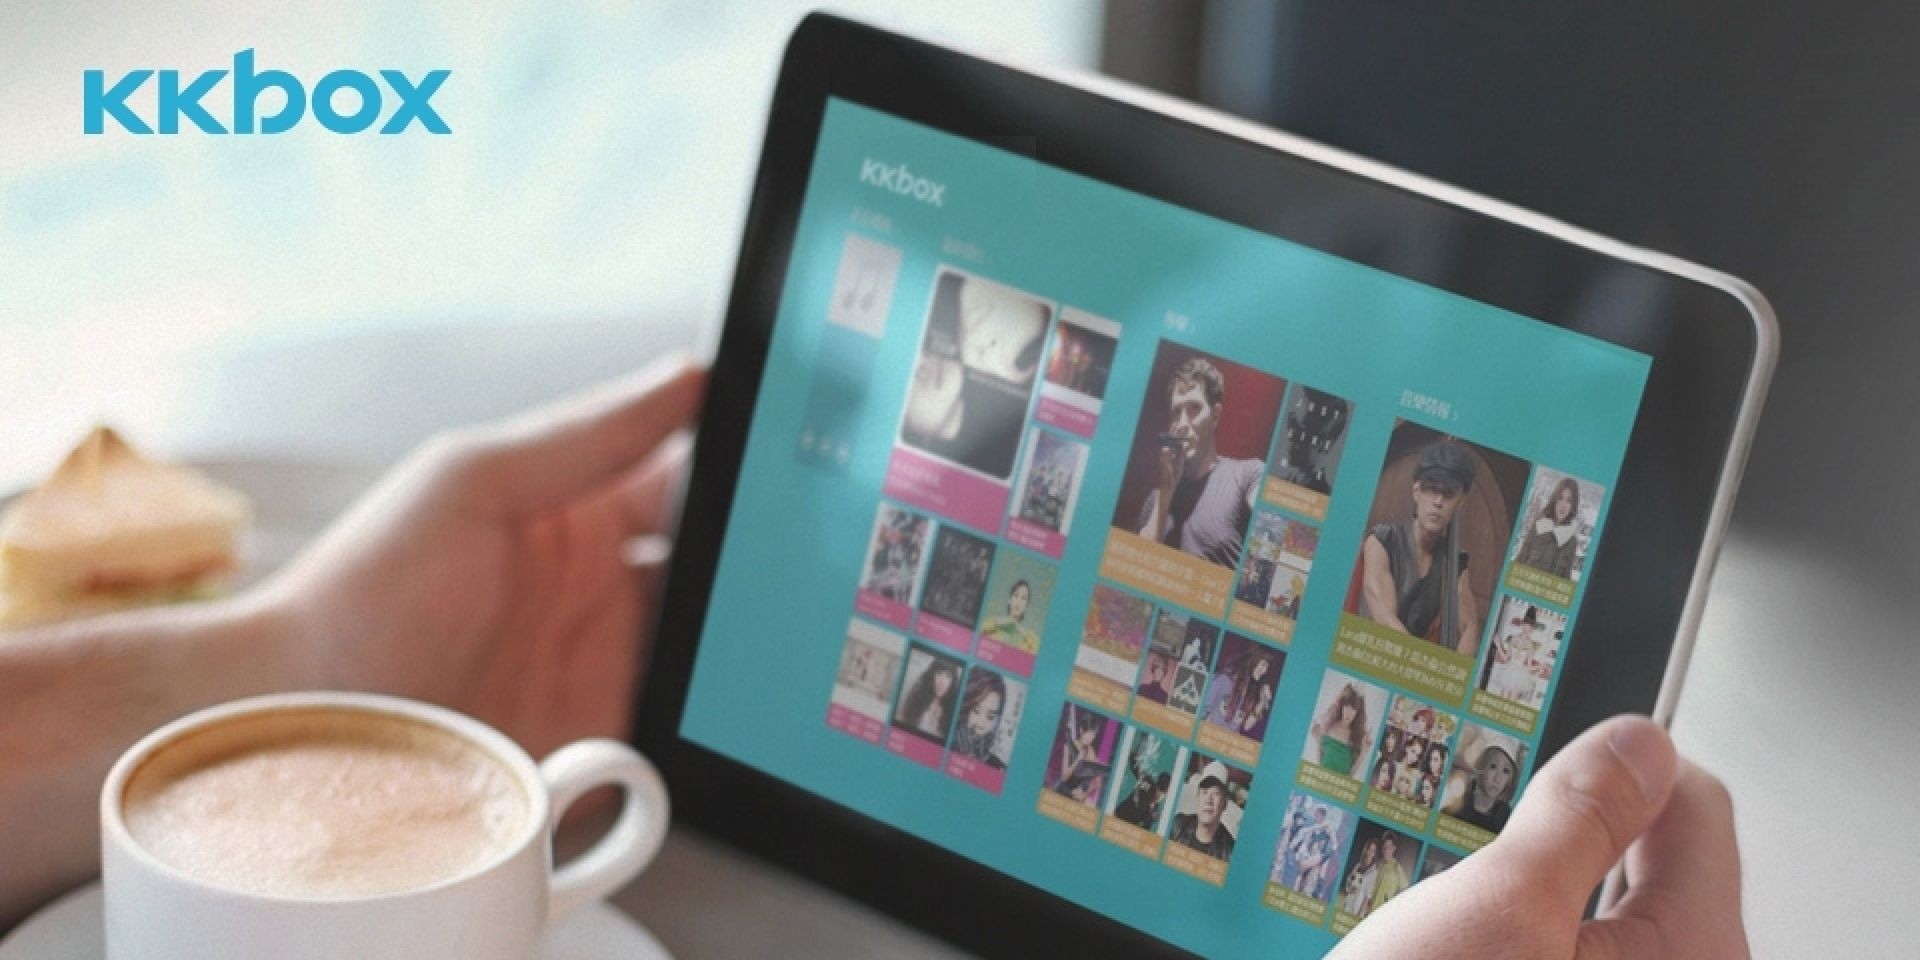 Music streaming platform KKBOX studied listener habits — here's what they found